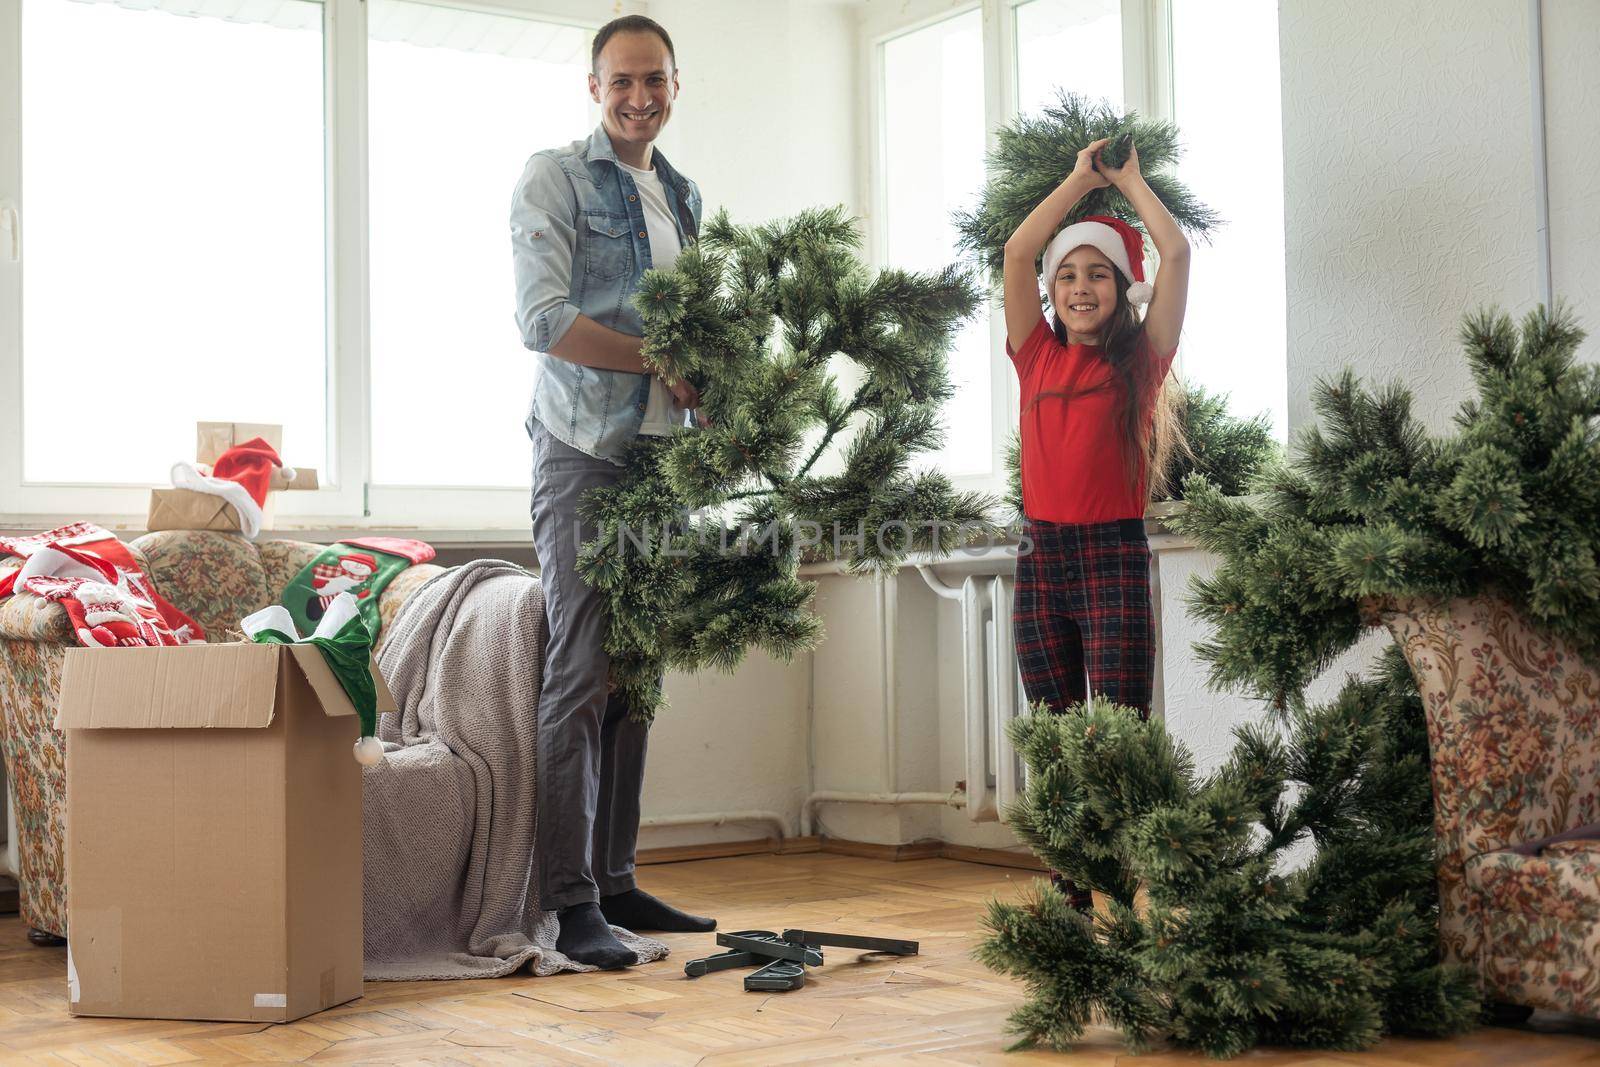 father and daughter install an artificial Christmas tree.